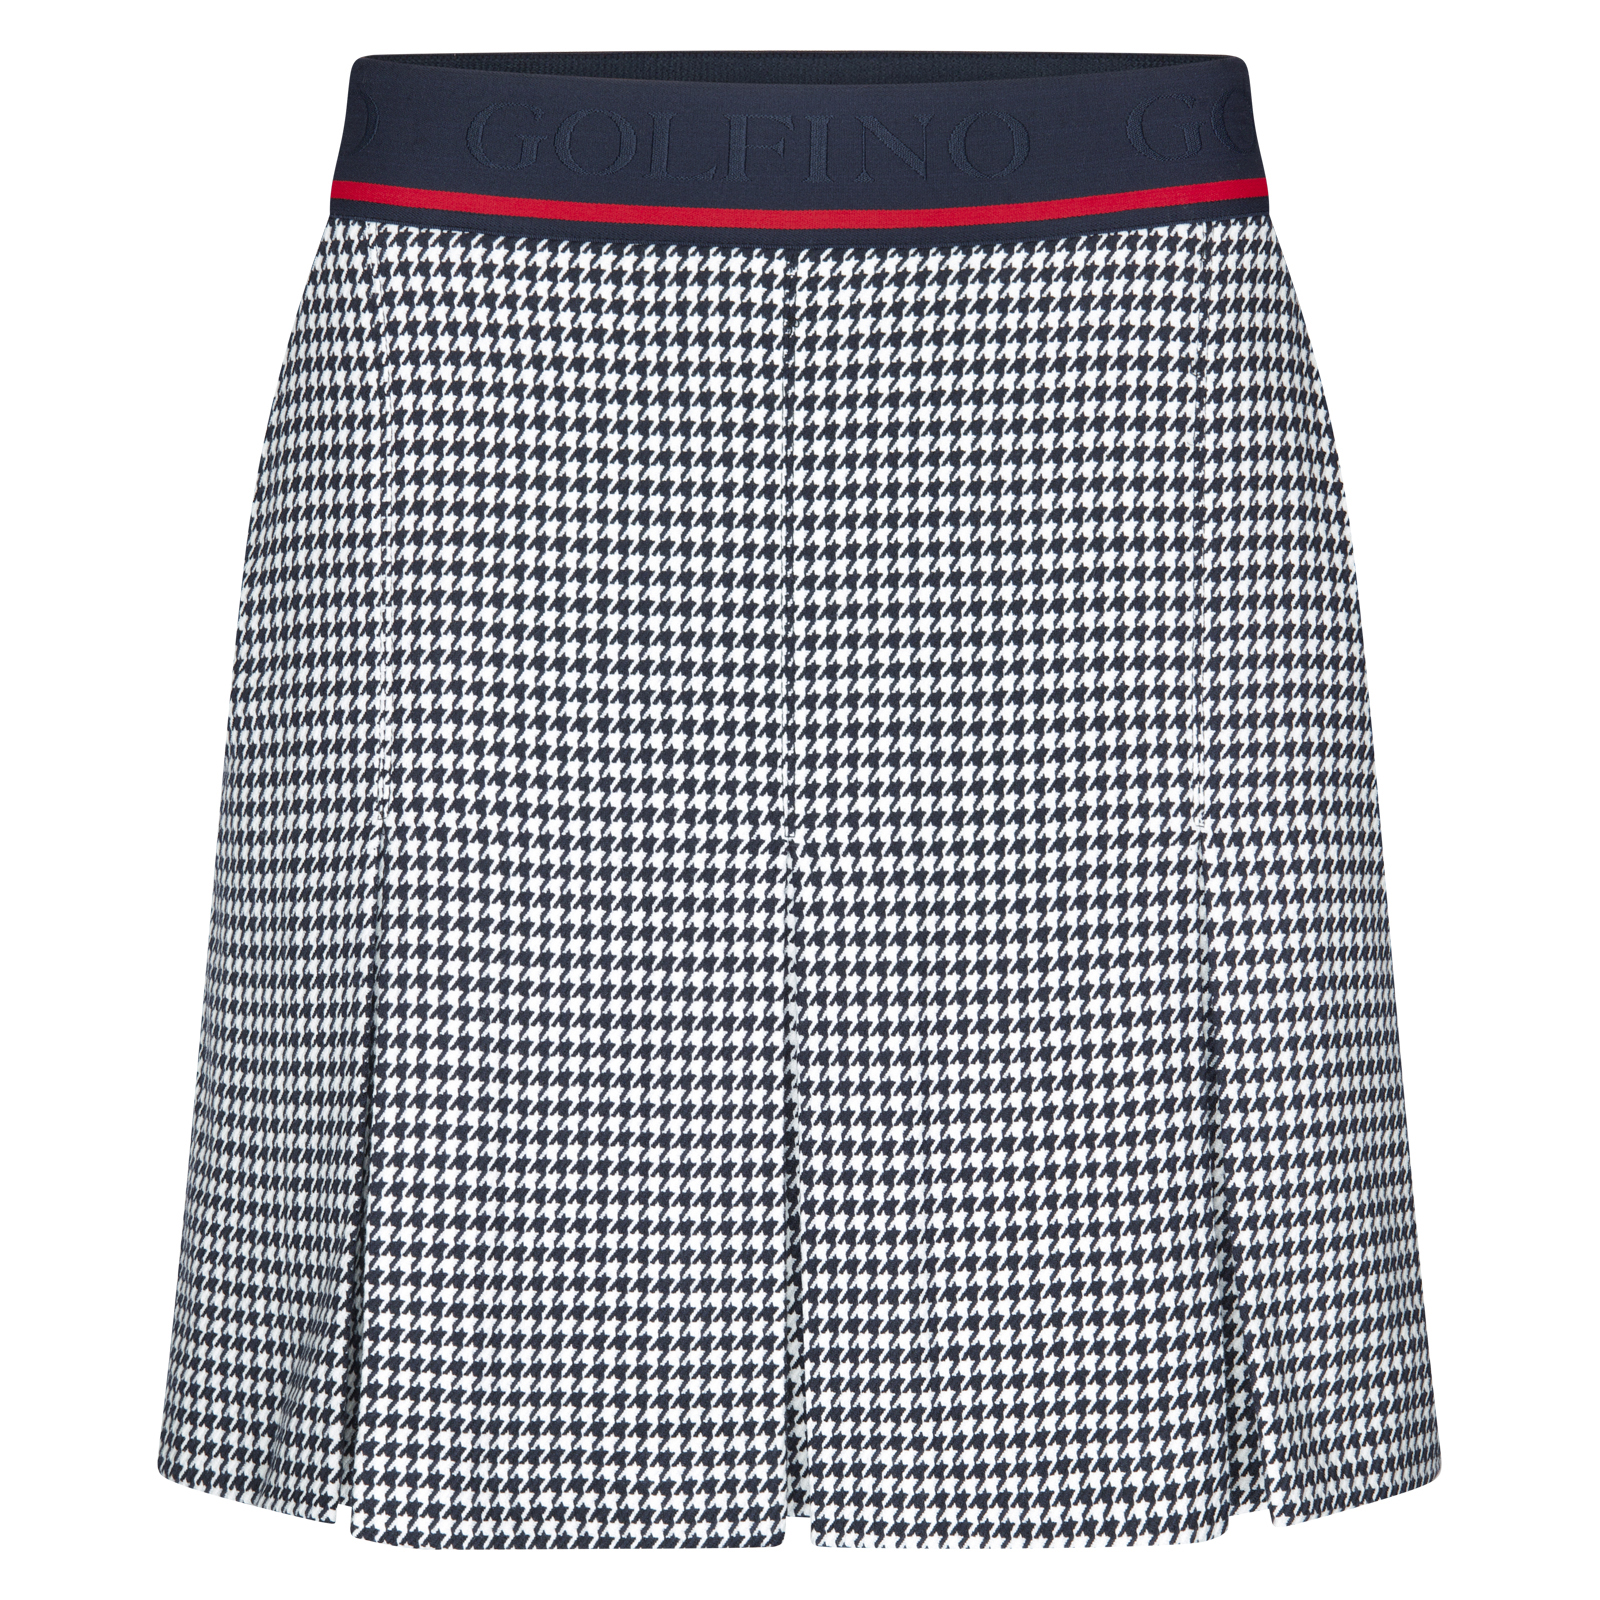 Ladies' pleated golf skirt in houndstooth pattern with viscose